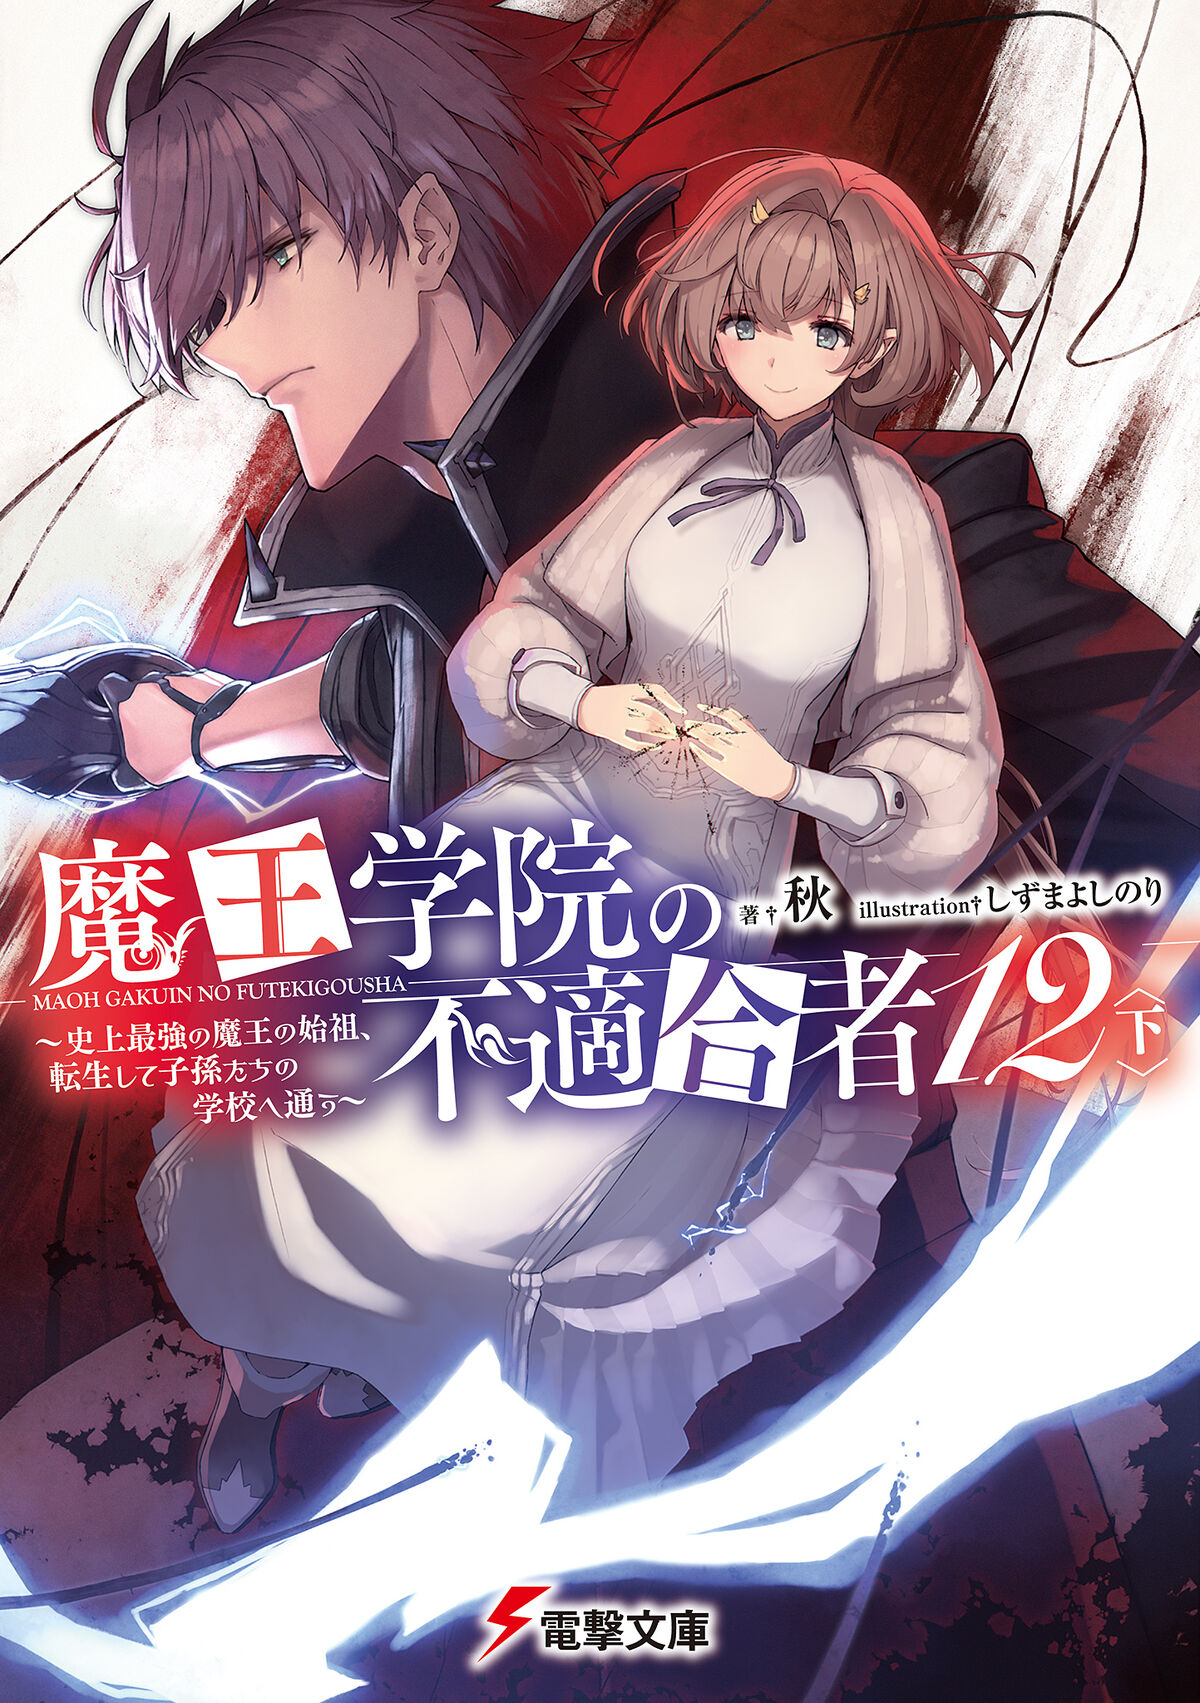 Maou Gakuin no Futekigousha - When 9 pages are better than the